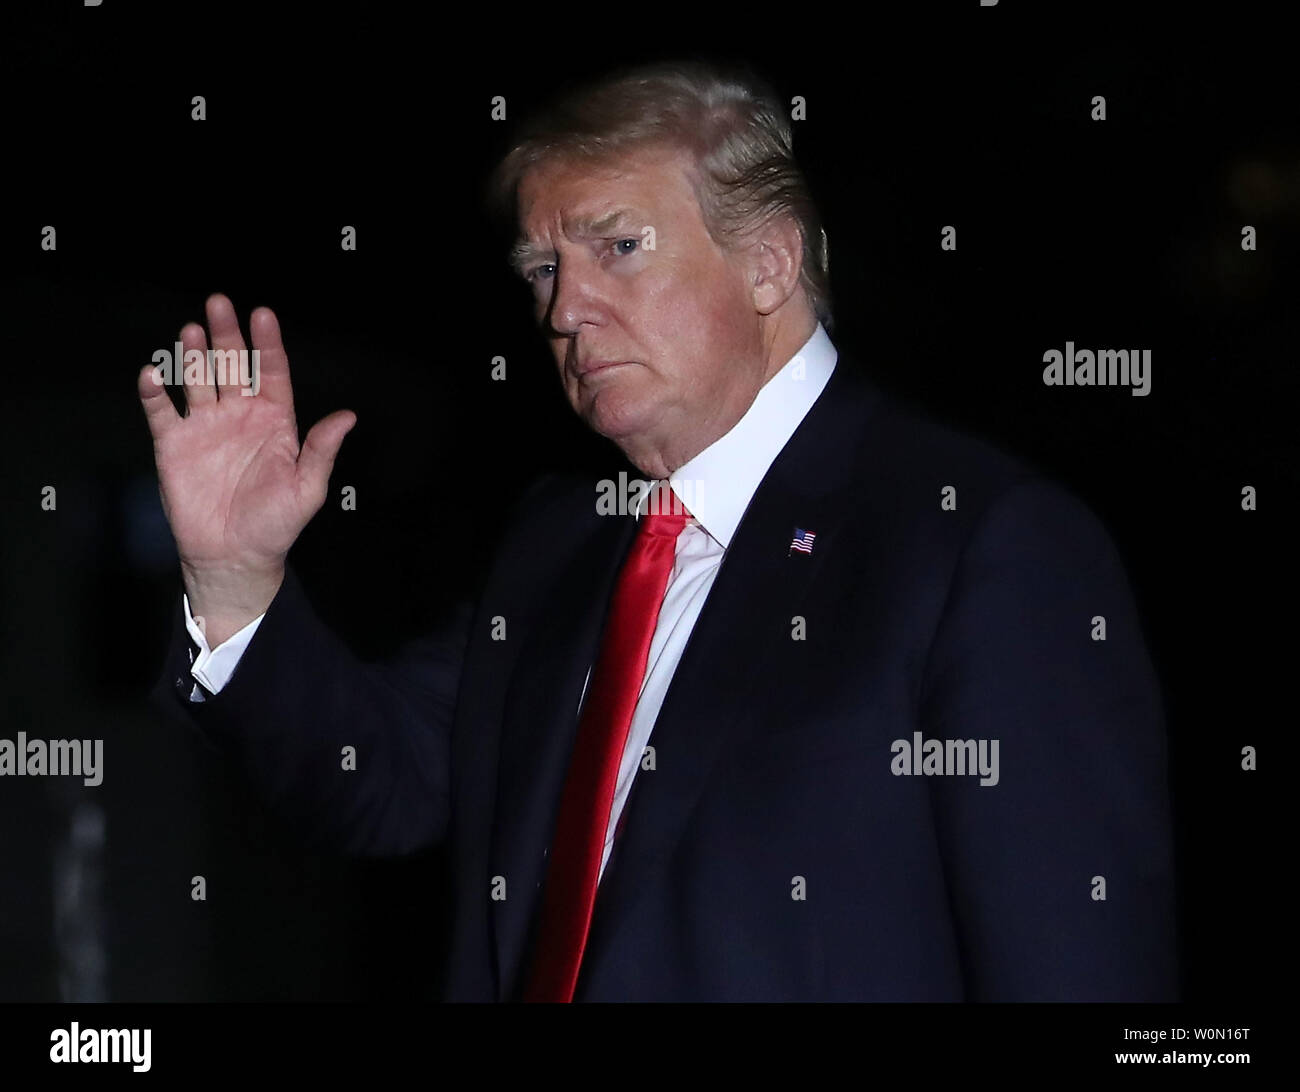 President Donald Trump waves as he walks to the White House after arriving on Marine One on May 29, 2018 in Washington, DC. President Trump traveled to Nashville, Tennessee to attend a campaign rally for Rep. Marsha Blackburn who is running for outgoing Sen. Bob Corker's Senate seat.     Photo by Mark Wilson/UPI Stock Photo